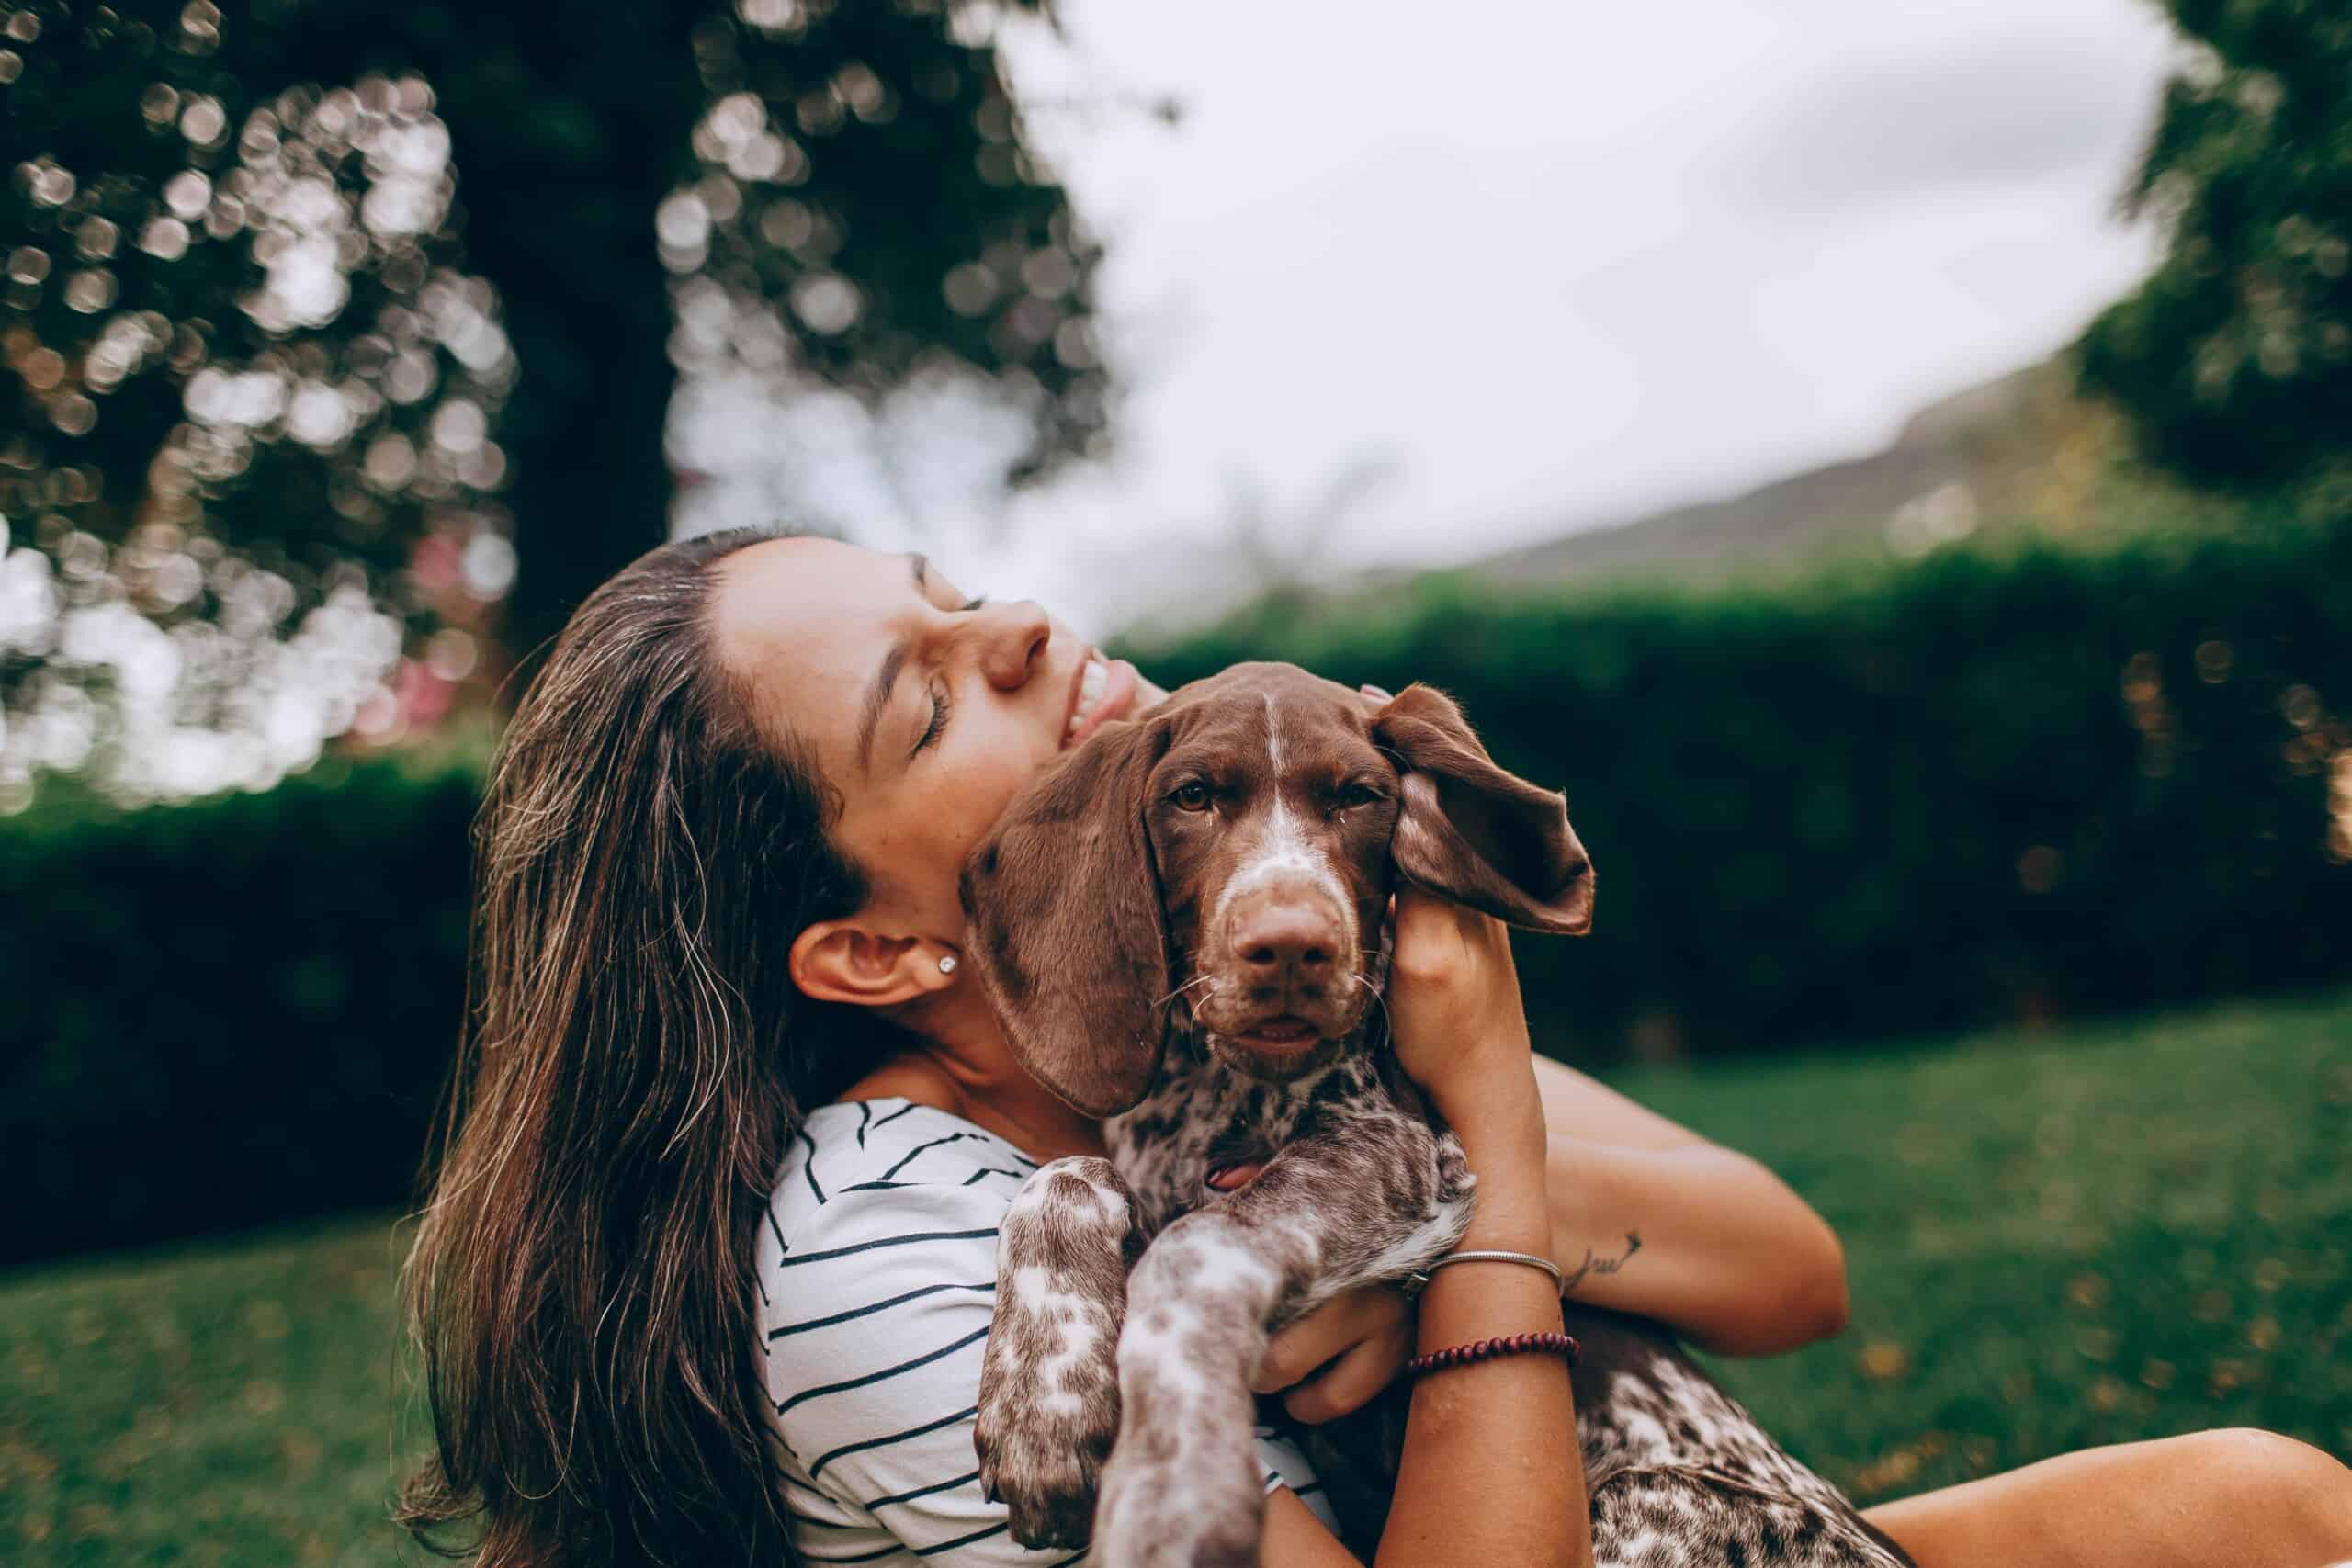 Hugging your pet can have positive effects on you